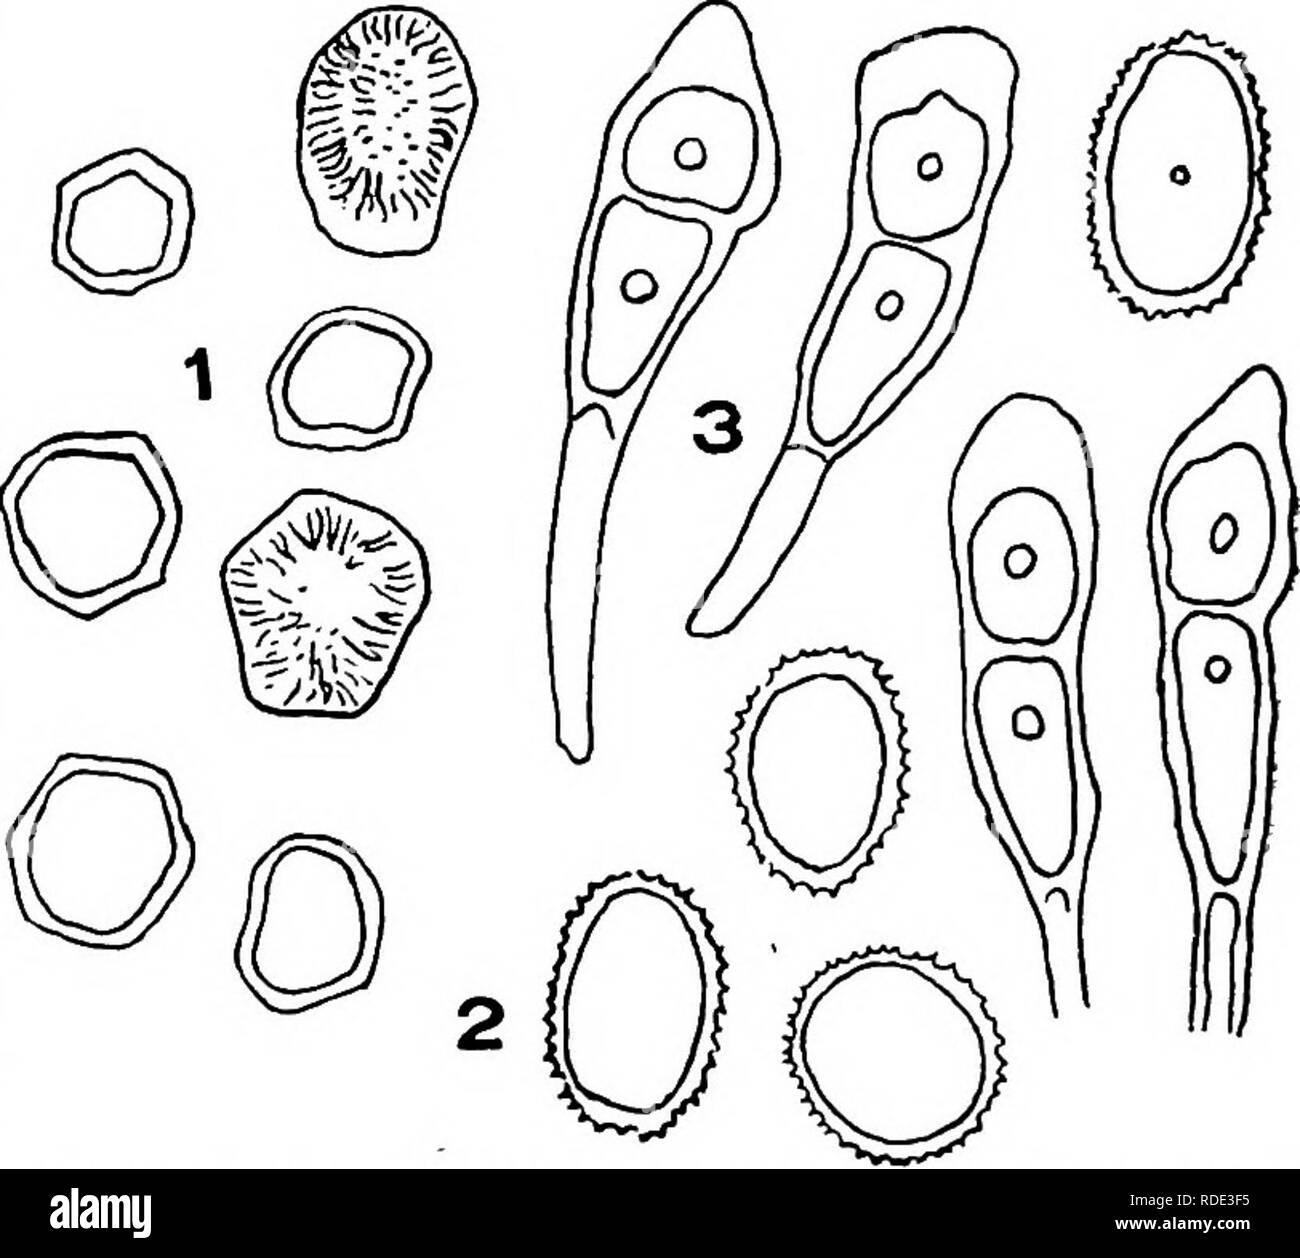 . Minnesota plant diseases. Plant diseases. 2 86 Minnesota Plant Diseases.. Fig. 142.—Spores of the common &quot;black rust&quot; (Puccinia graminis) of wheat. 1. Cluster-cup spores from the barberry plant. 2. Summer spores from the wheat plant. 3. Winter spores from the wheat plant. Highly magnified. After Arthur and Holway. aggerated because the smaller losses due to the presence of the rust in very slight and therefore unheeded quantities may never be computed. These are, nevertheless, a' certain loss. There is only a difference in degree. The en- tire eHmination of /^^^^^ rust would theref Stock Photo